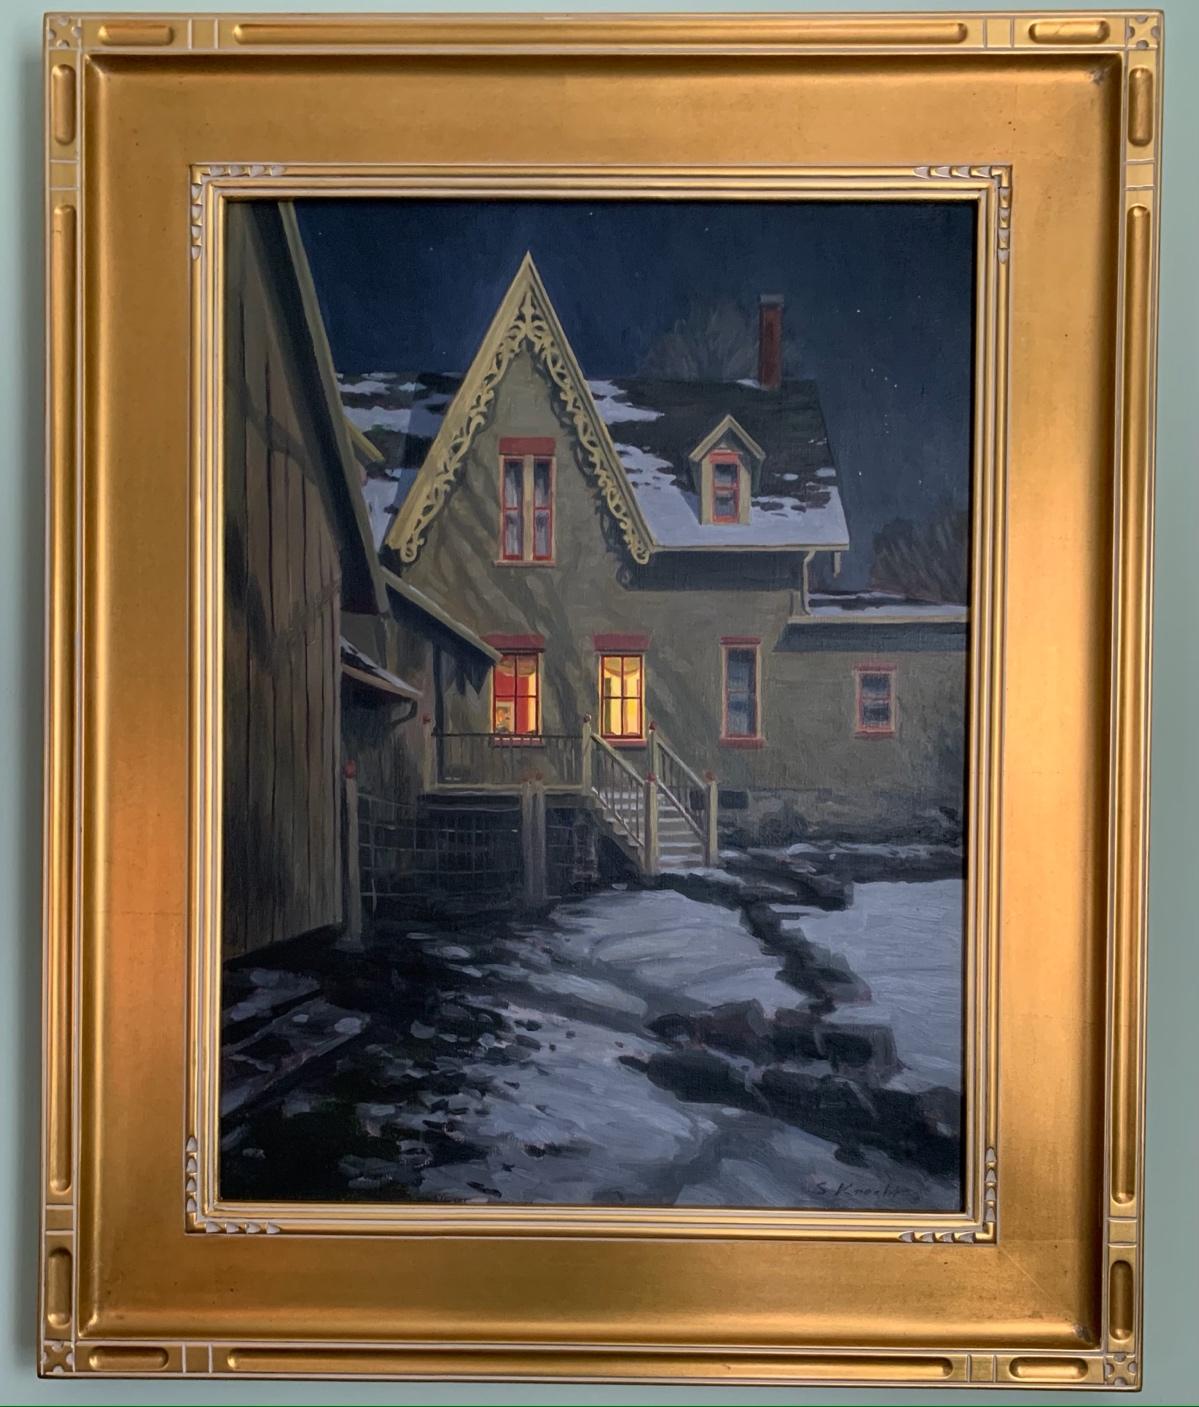 A painting of a house in a gold frame

Description automatically generated